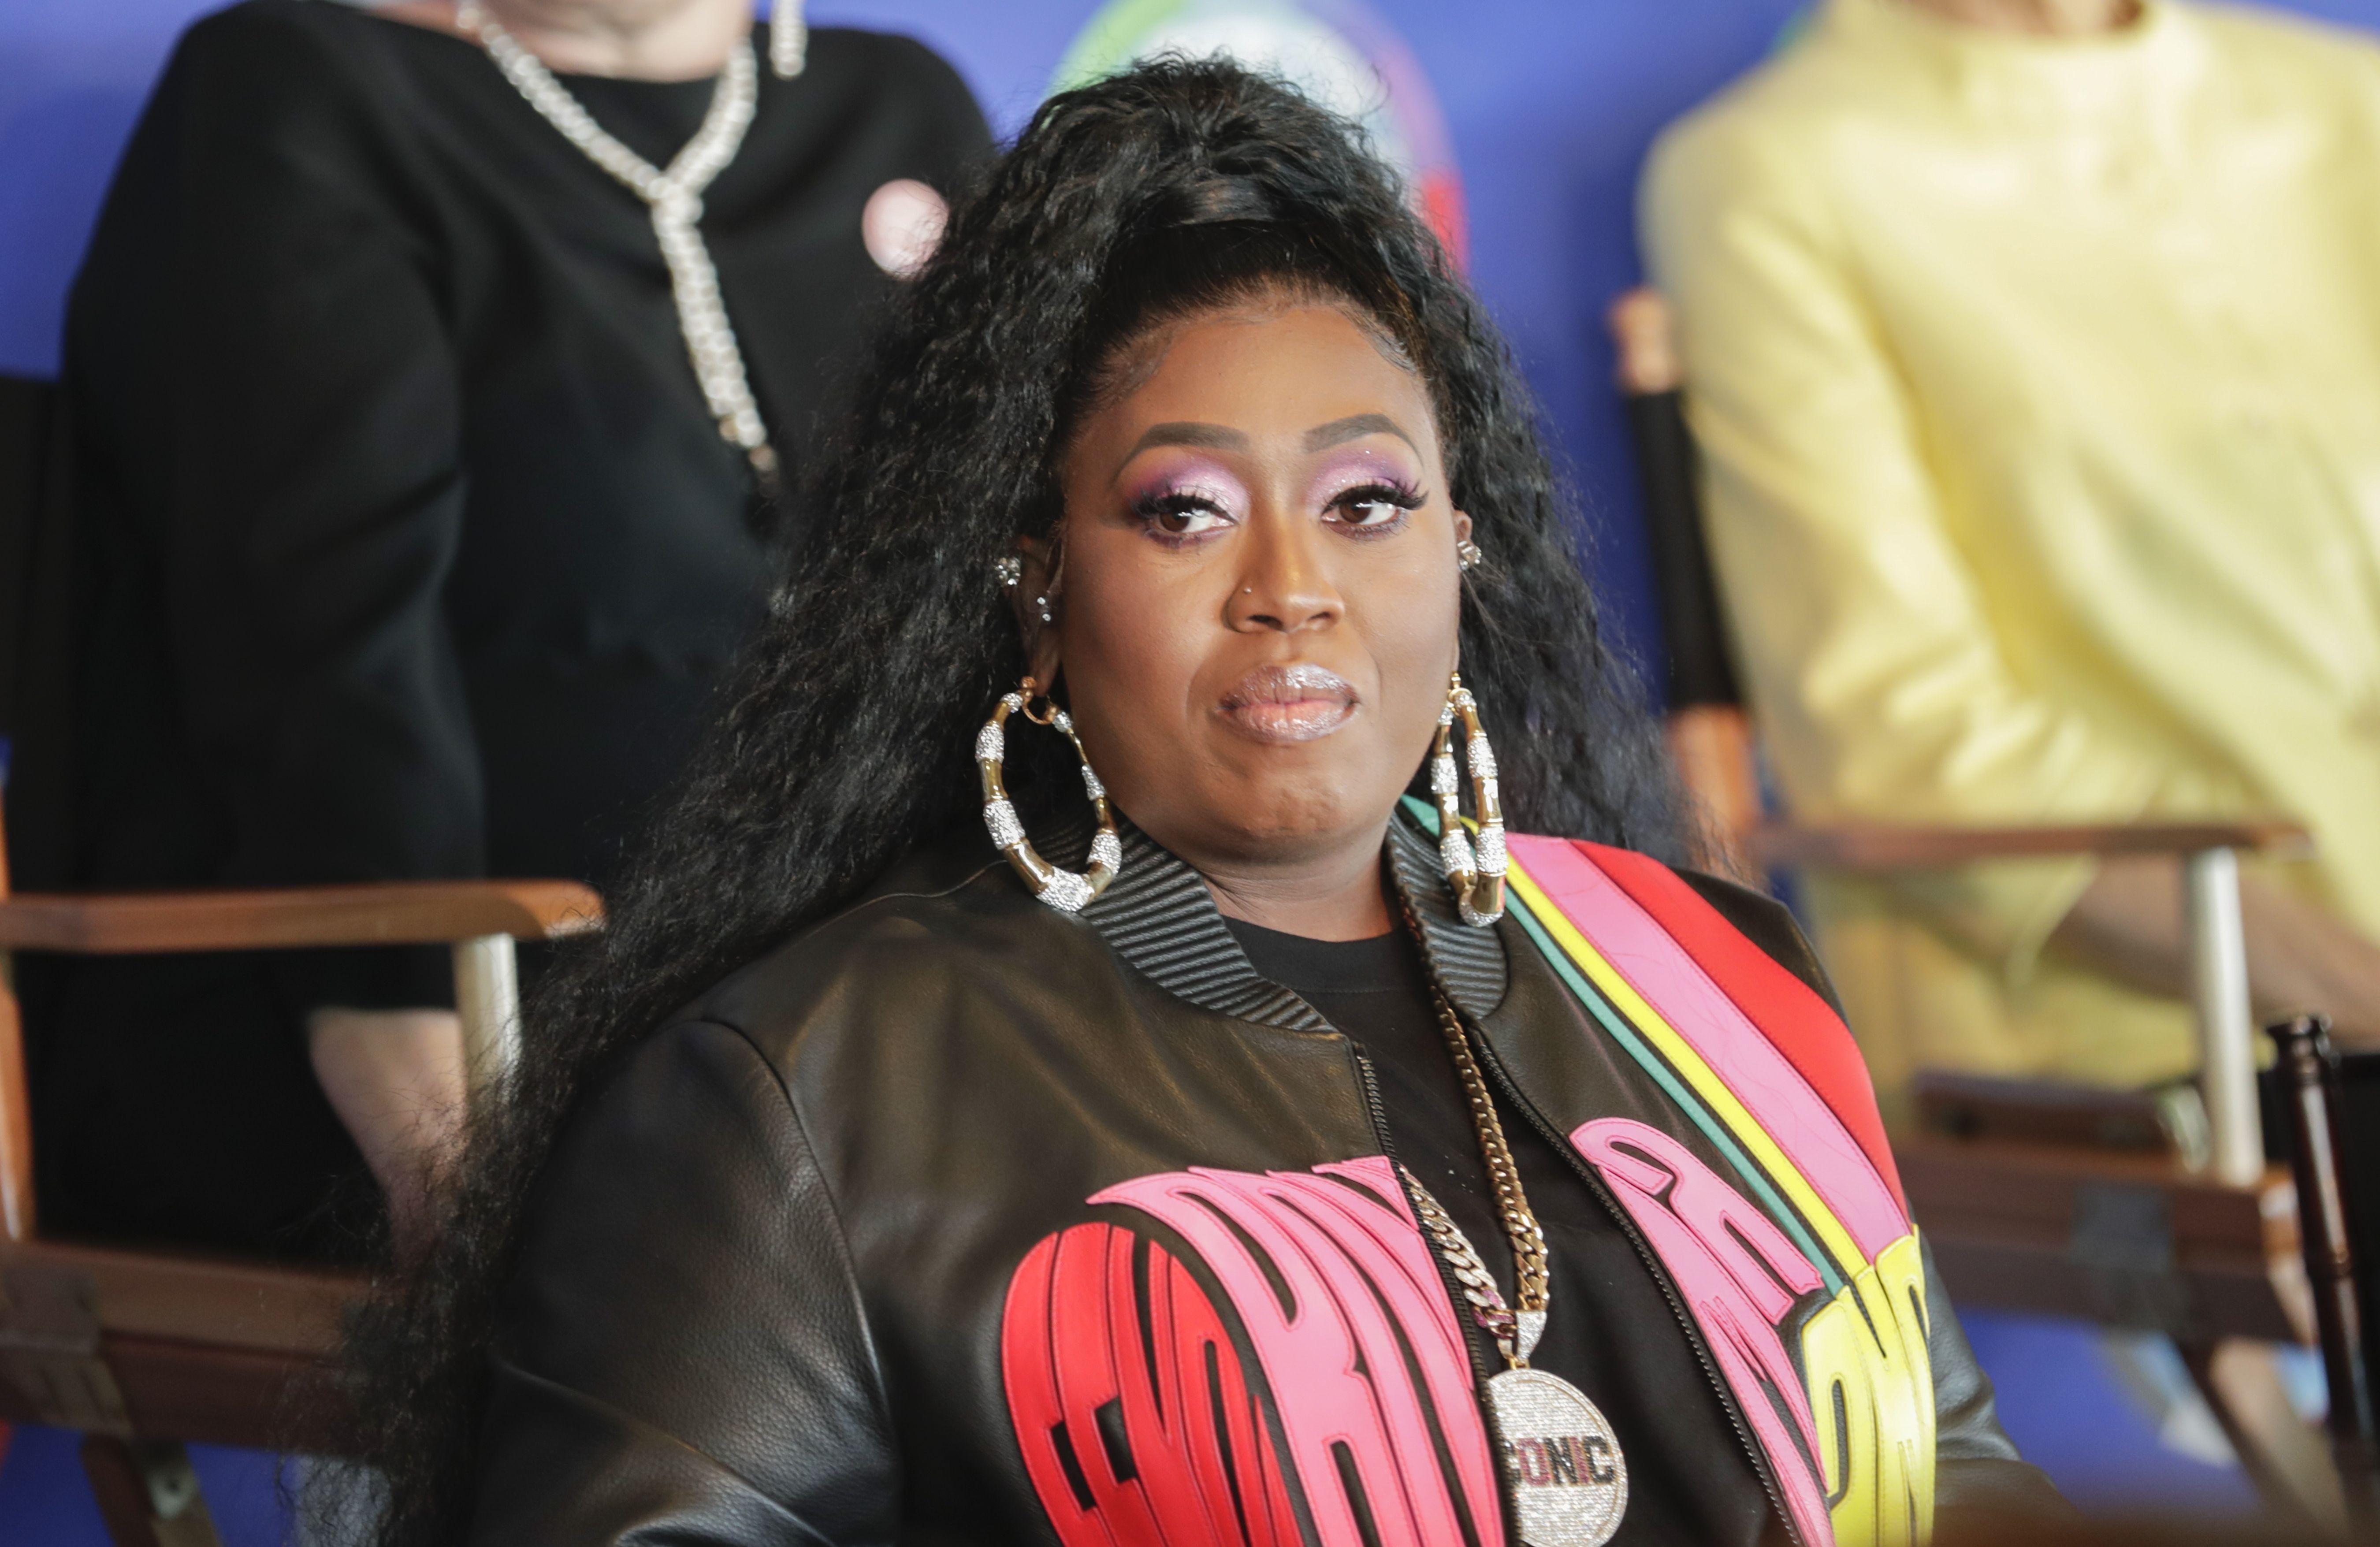 Missy Elliott speaks during Women's Entrepreneurship Day (WED) at the UN Headquarters in New York City, New York, November 15, 2019. | Source: Getty Images